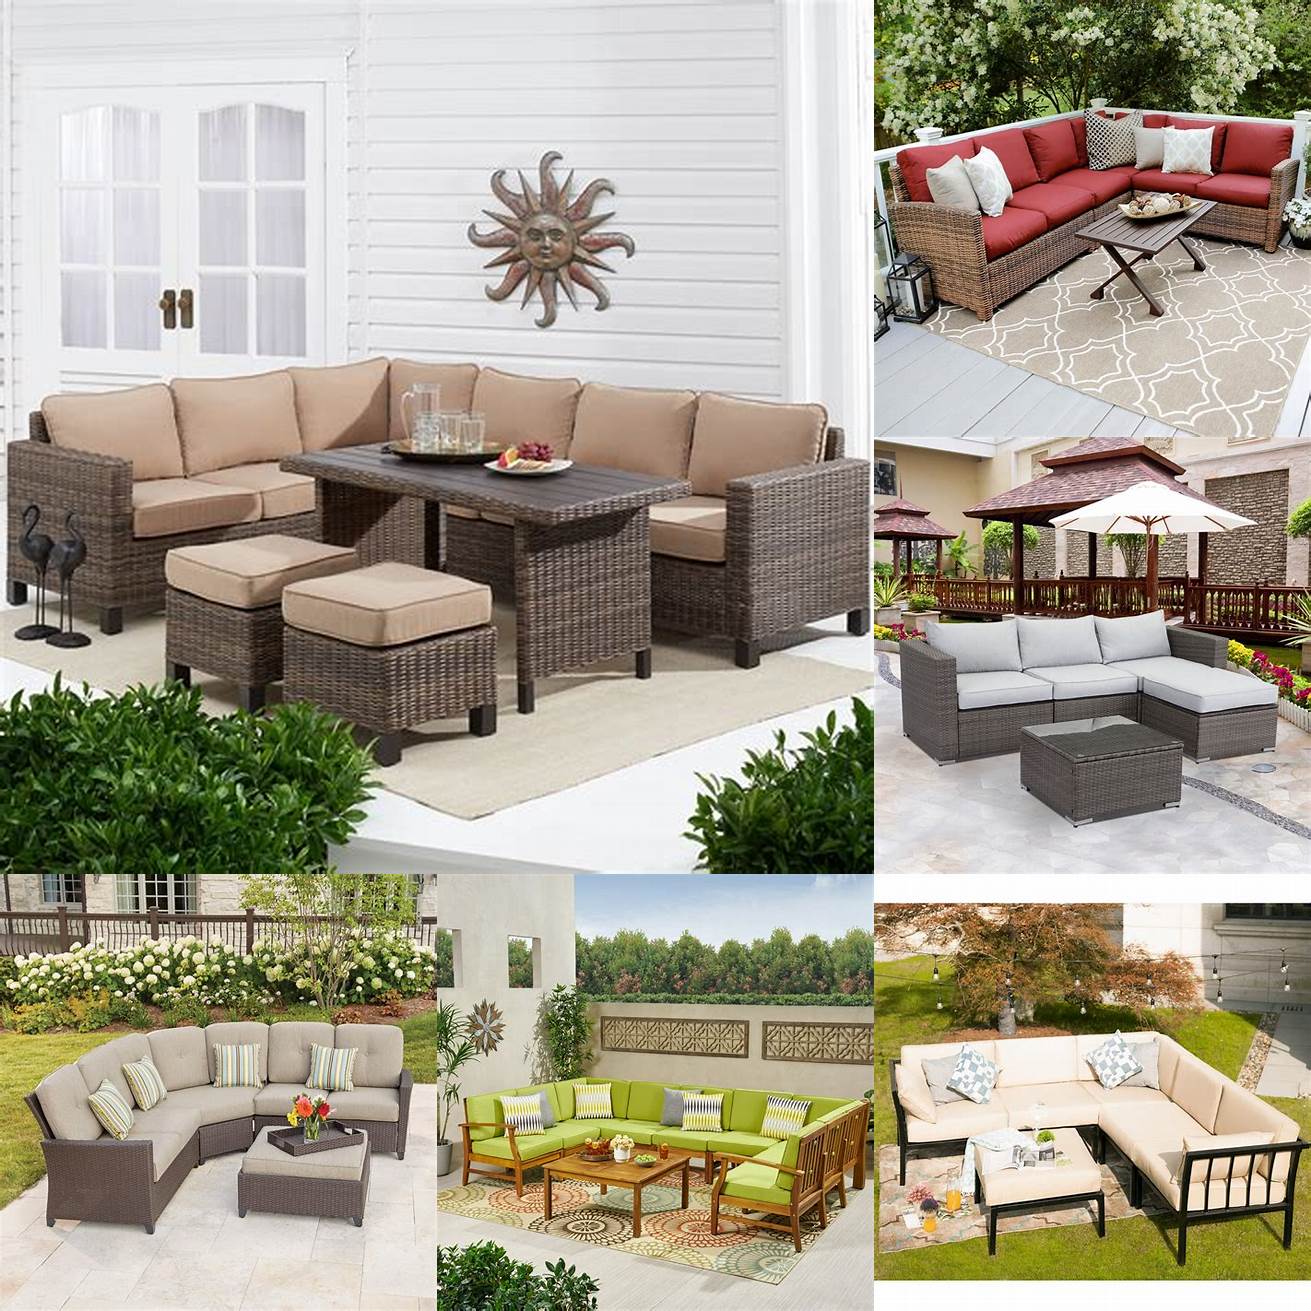 Outdoor sectional sofa with cushions